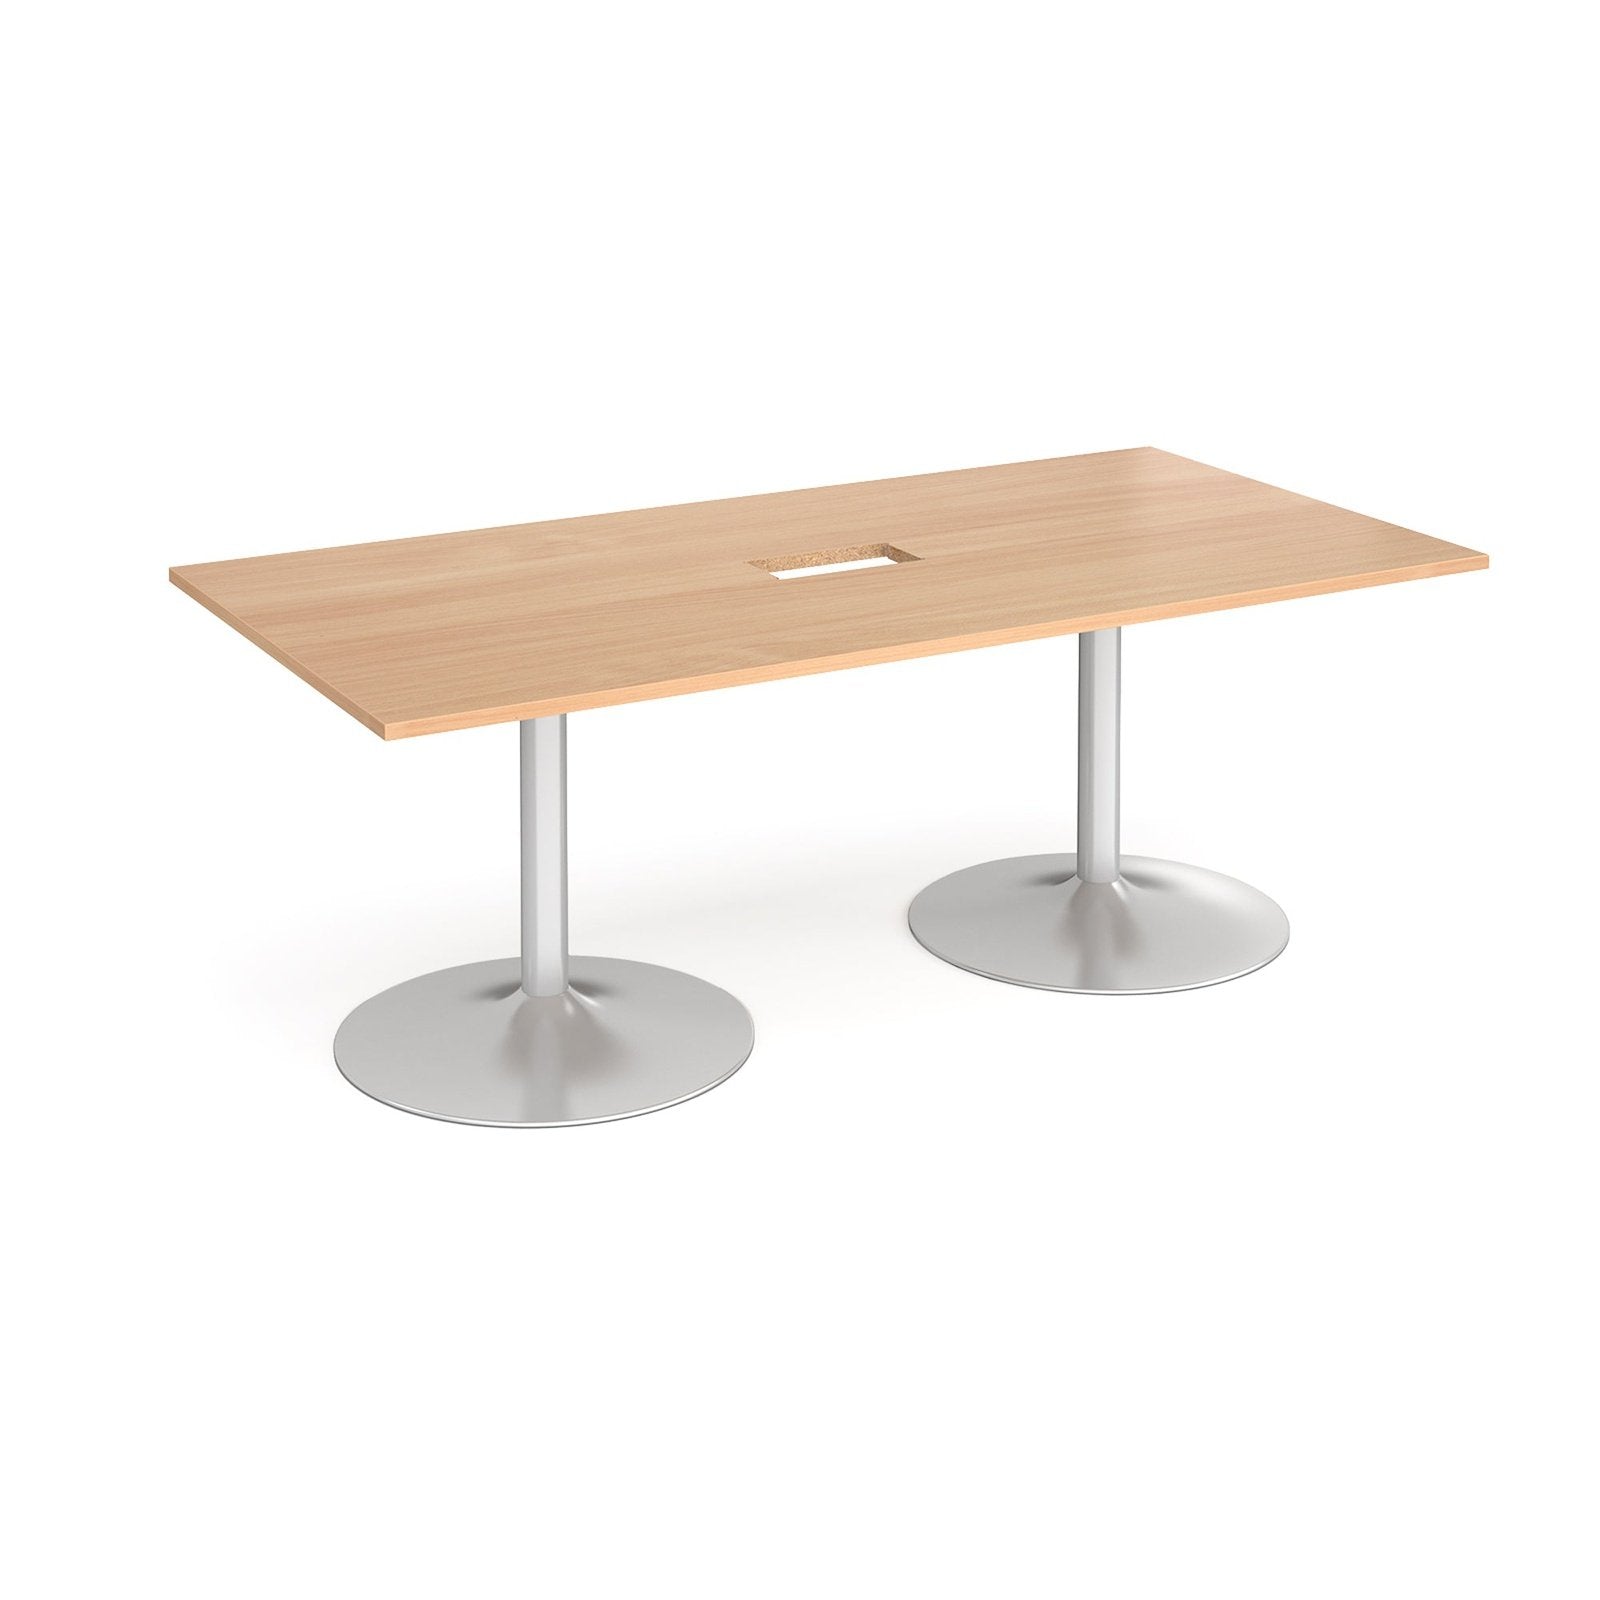 Trumpet base rectangular boardroom table with central cutout - Office Products Online